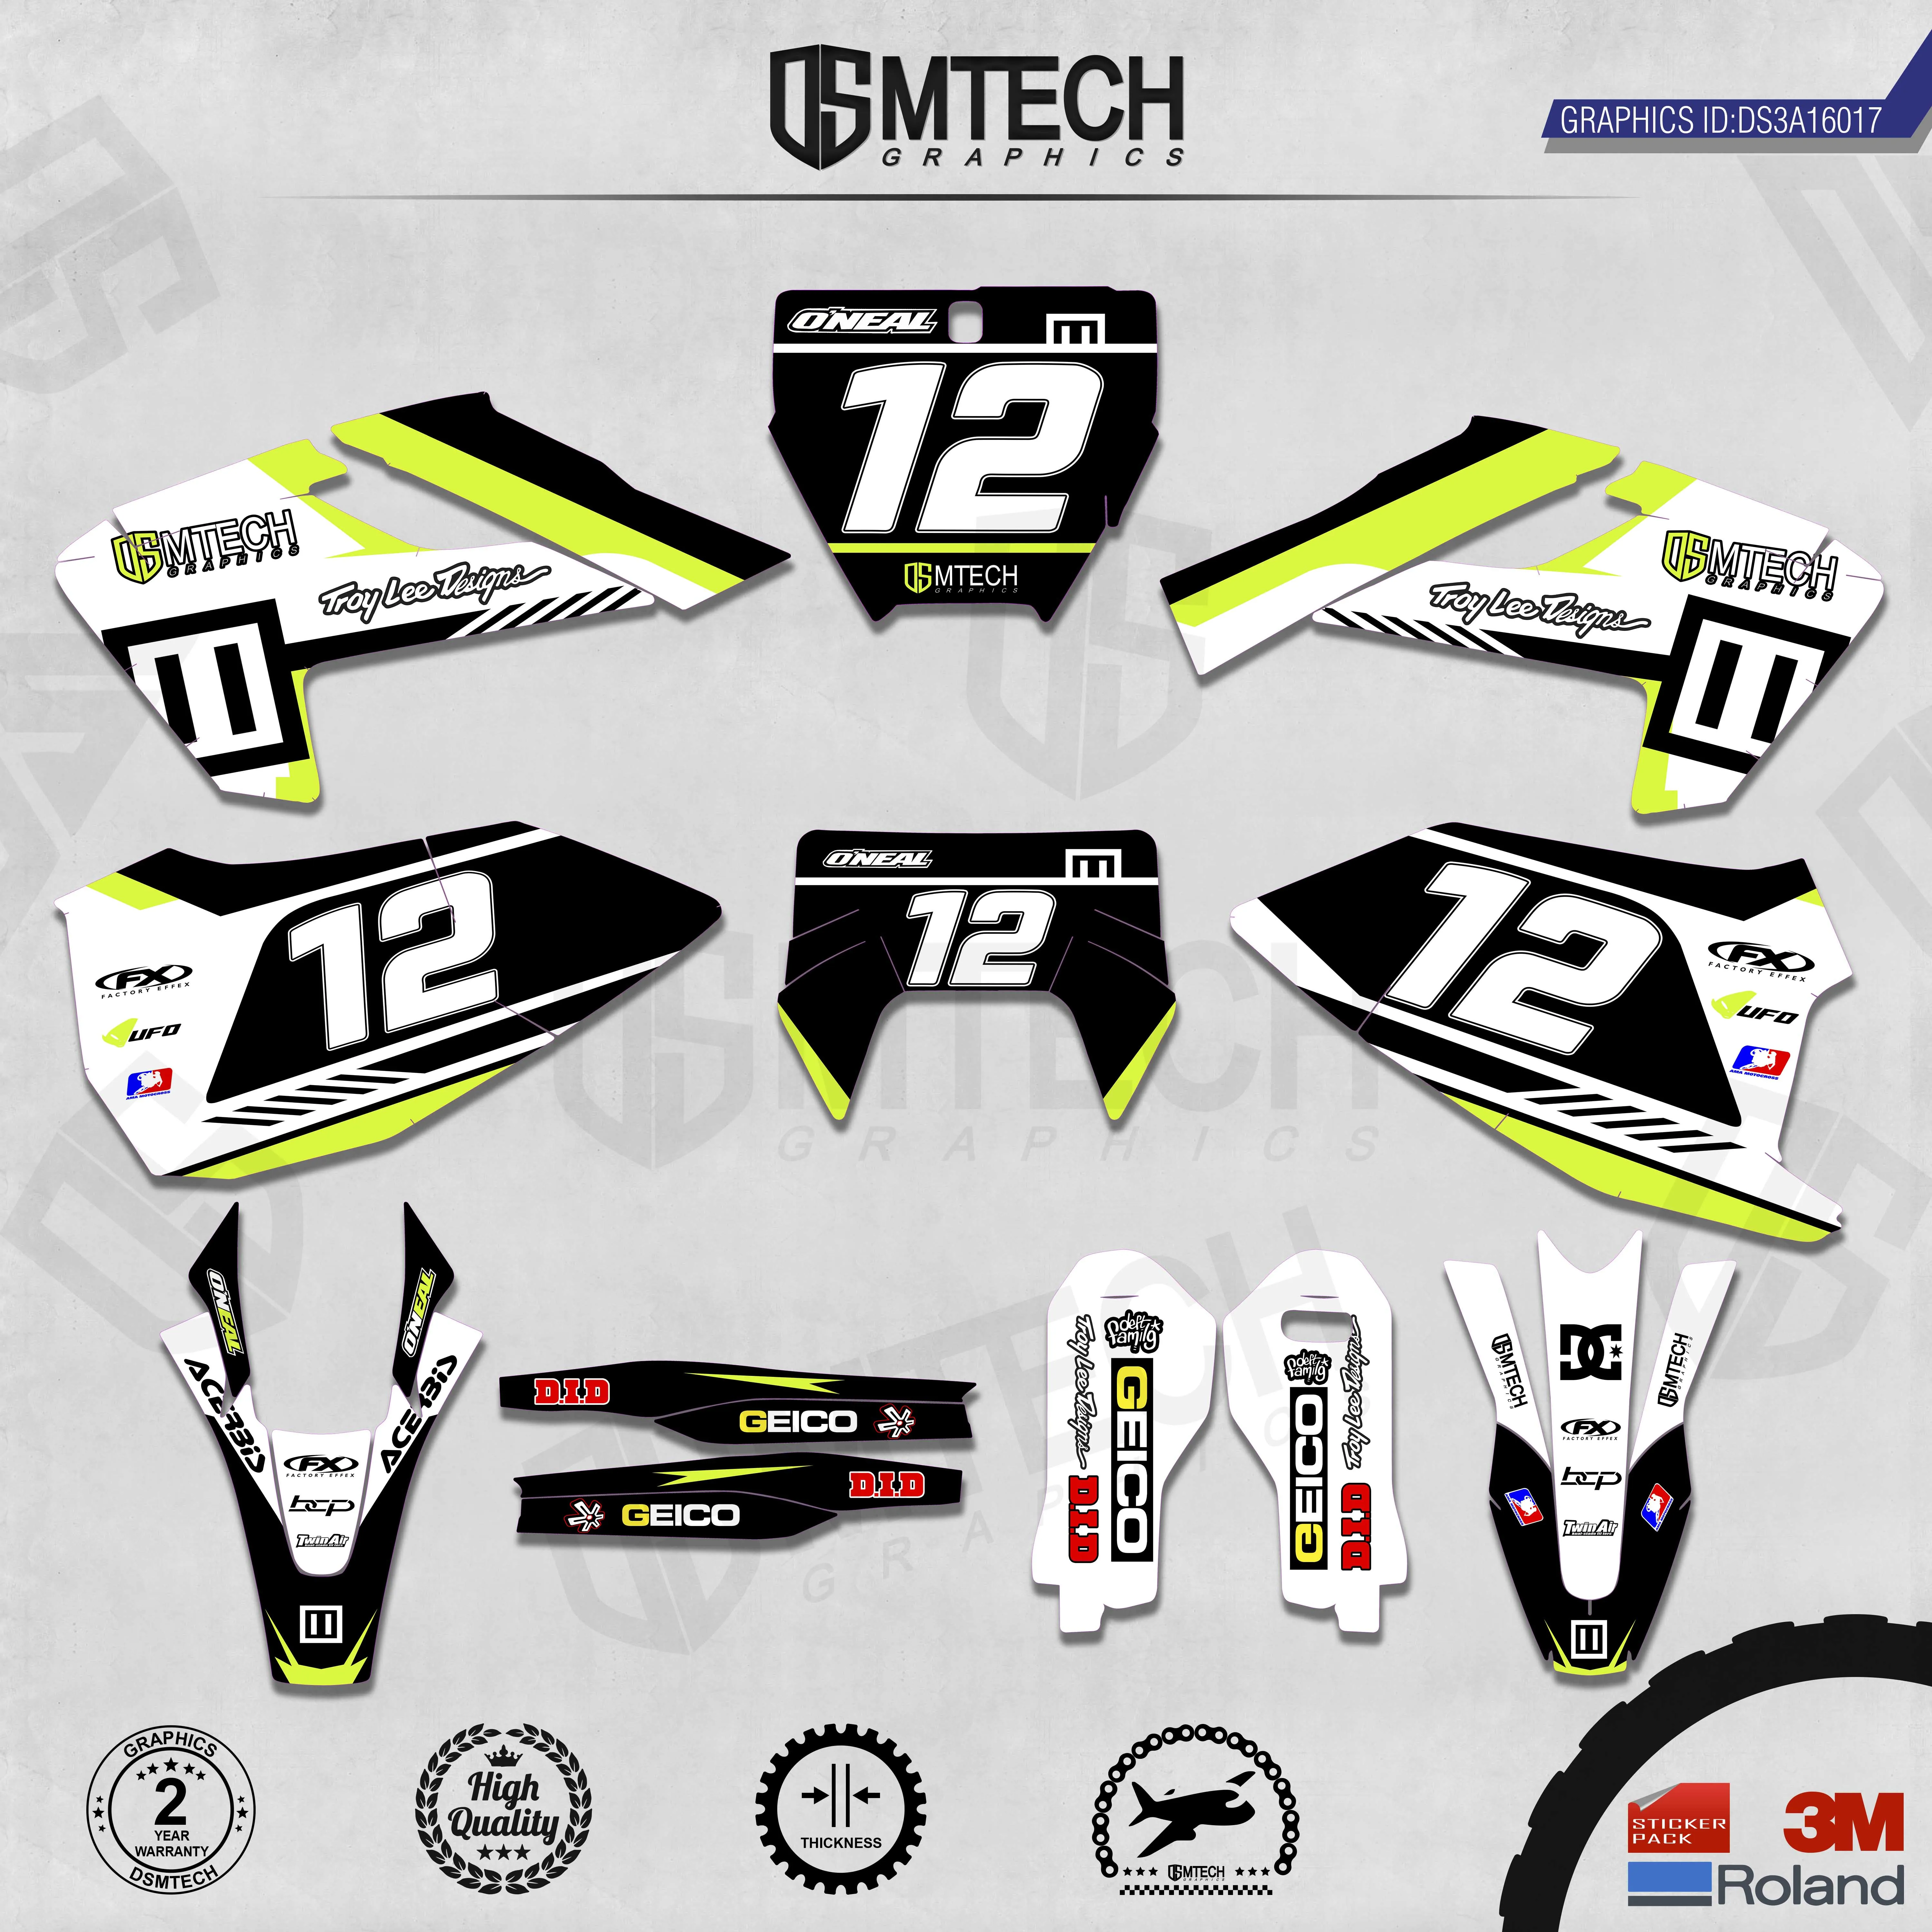 DSMTECH Customized Team Graphics Backgrounds Decals 3M Custom Stickers For TC FC TX FX FS 2016-2018  TE FE 2017-2019  017